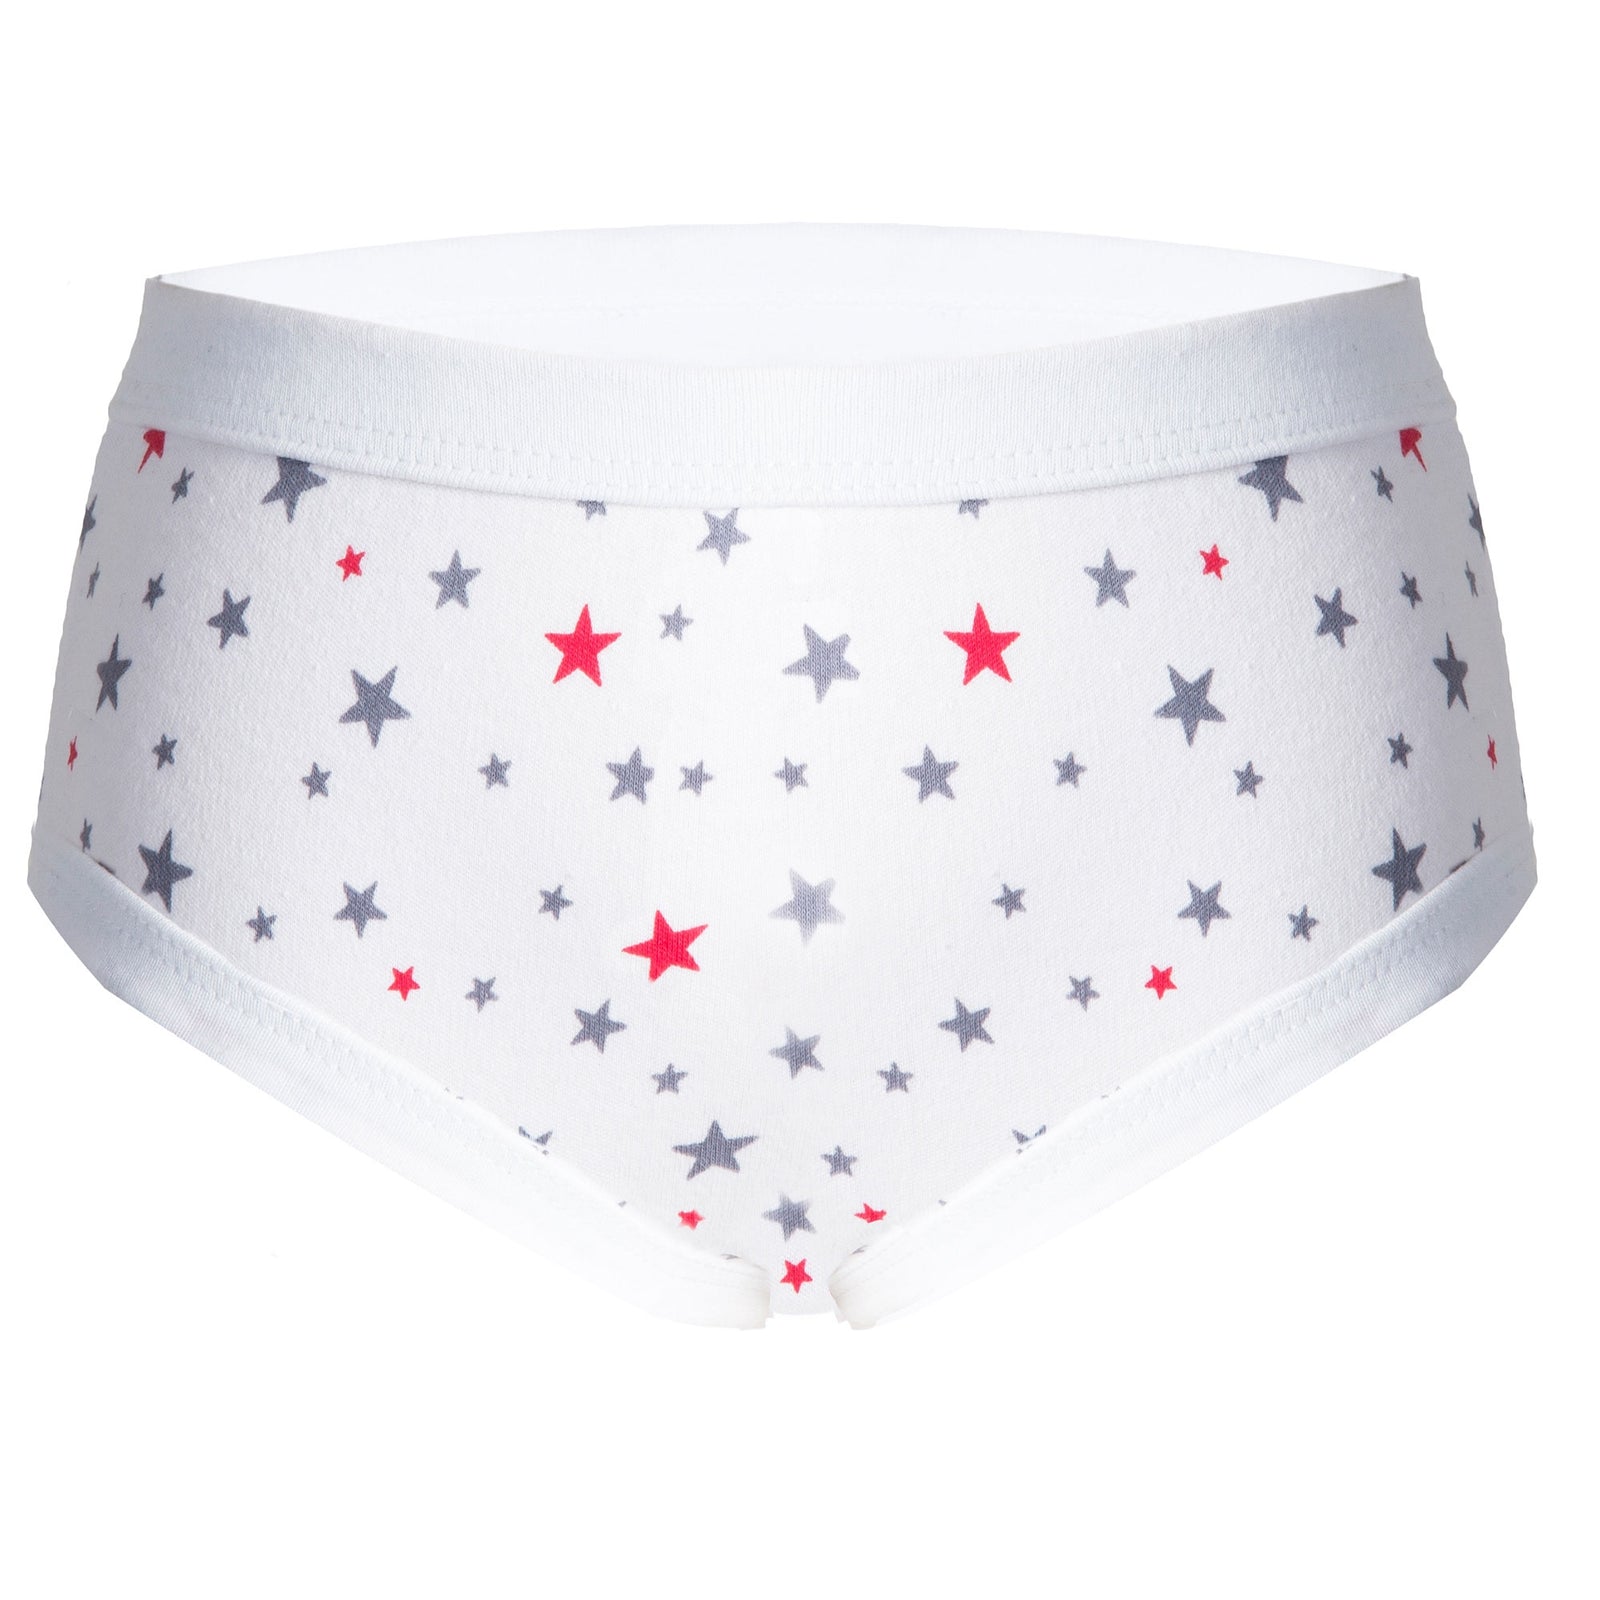 Vinyl Incontinence Underpants for Adults – Set of 3